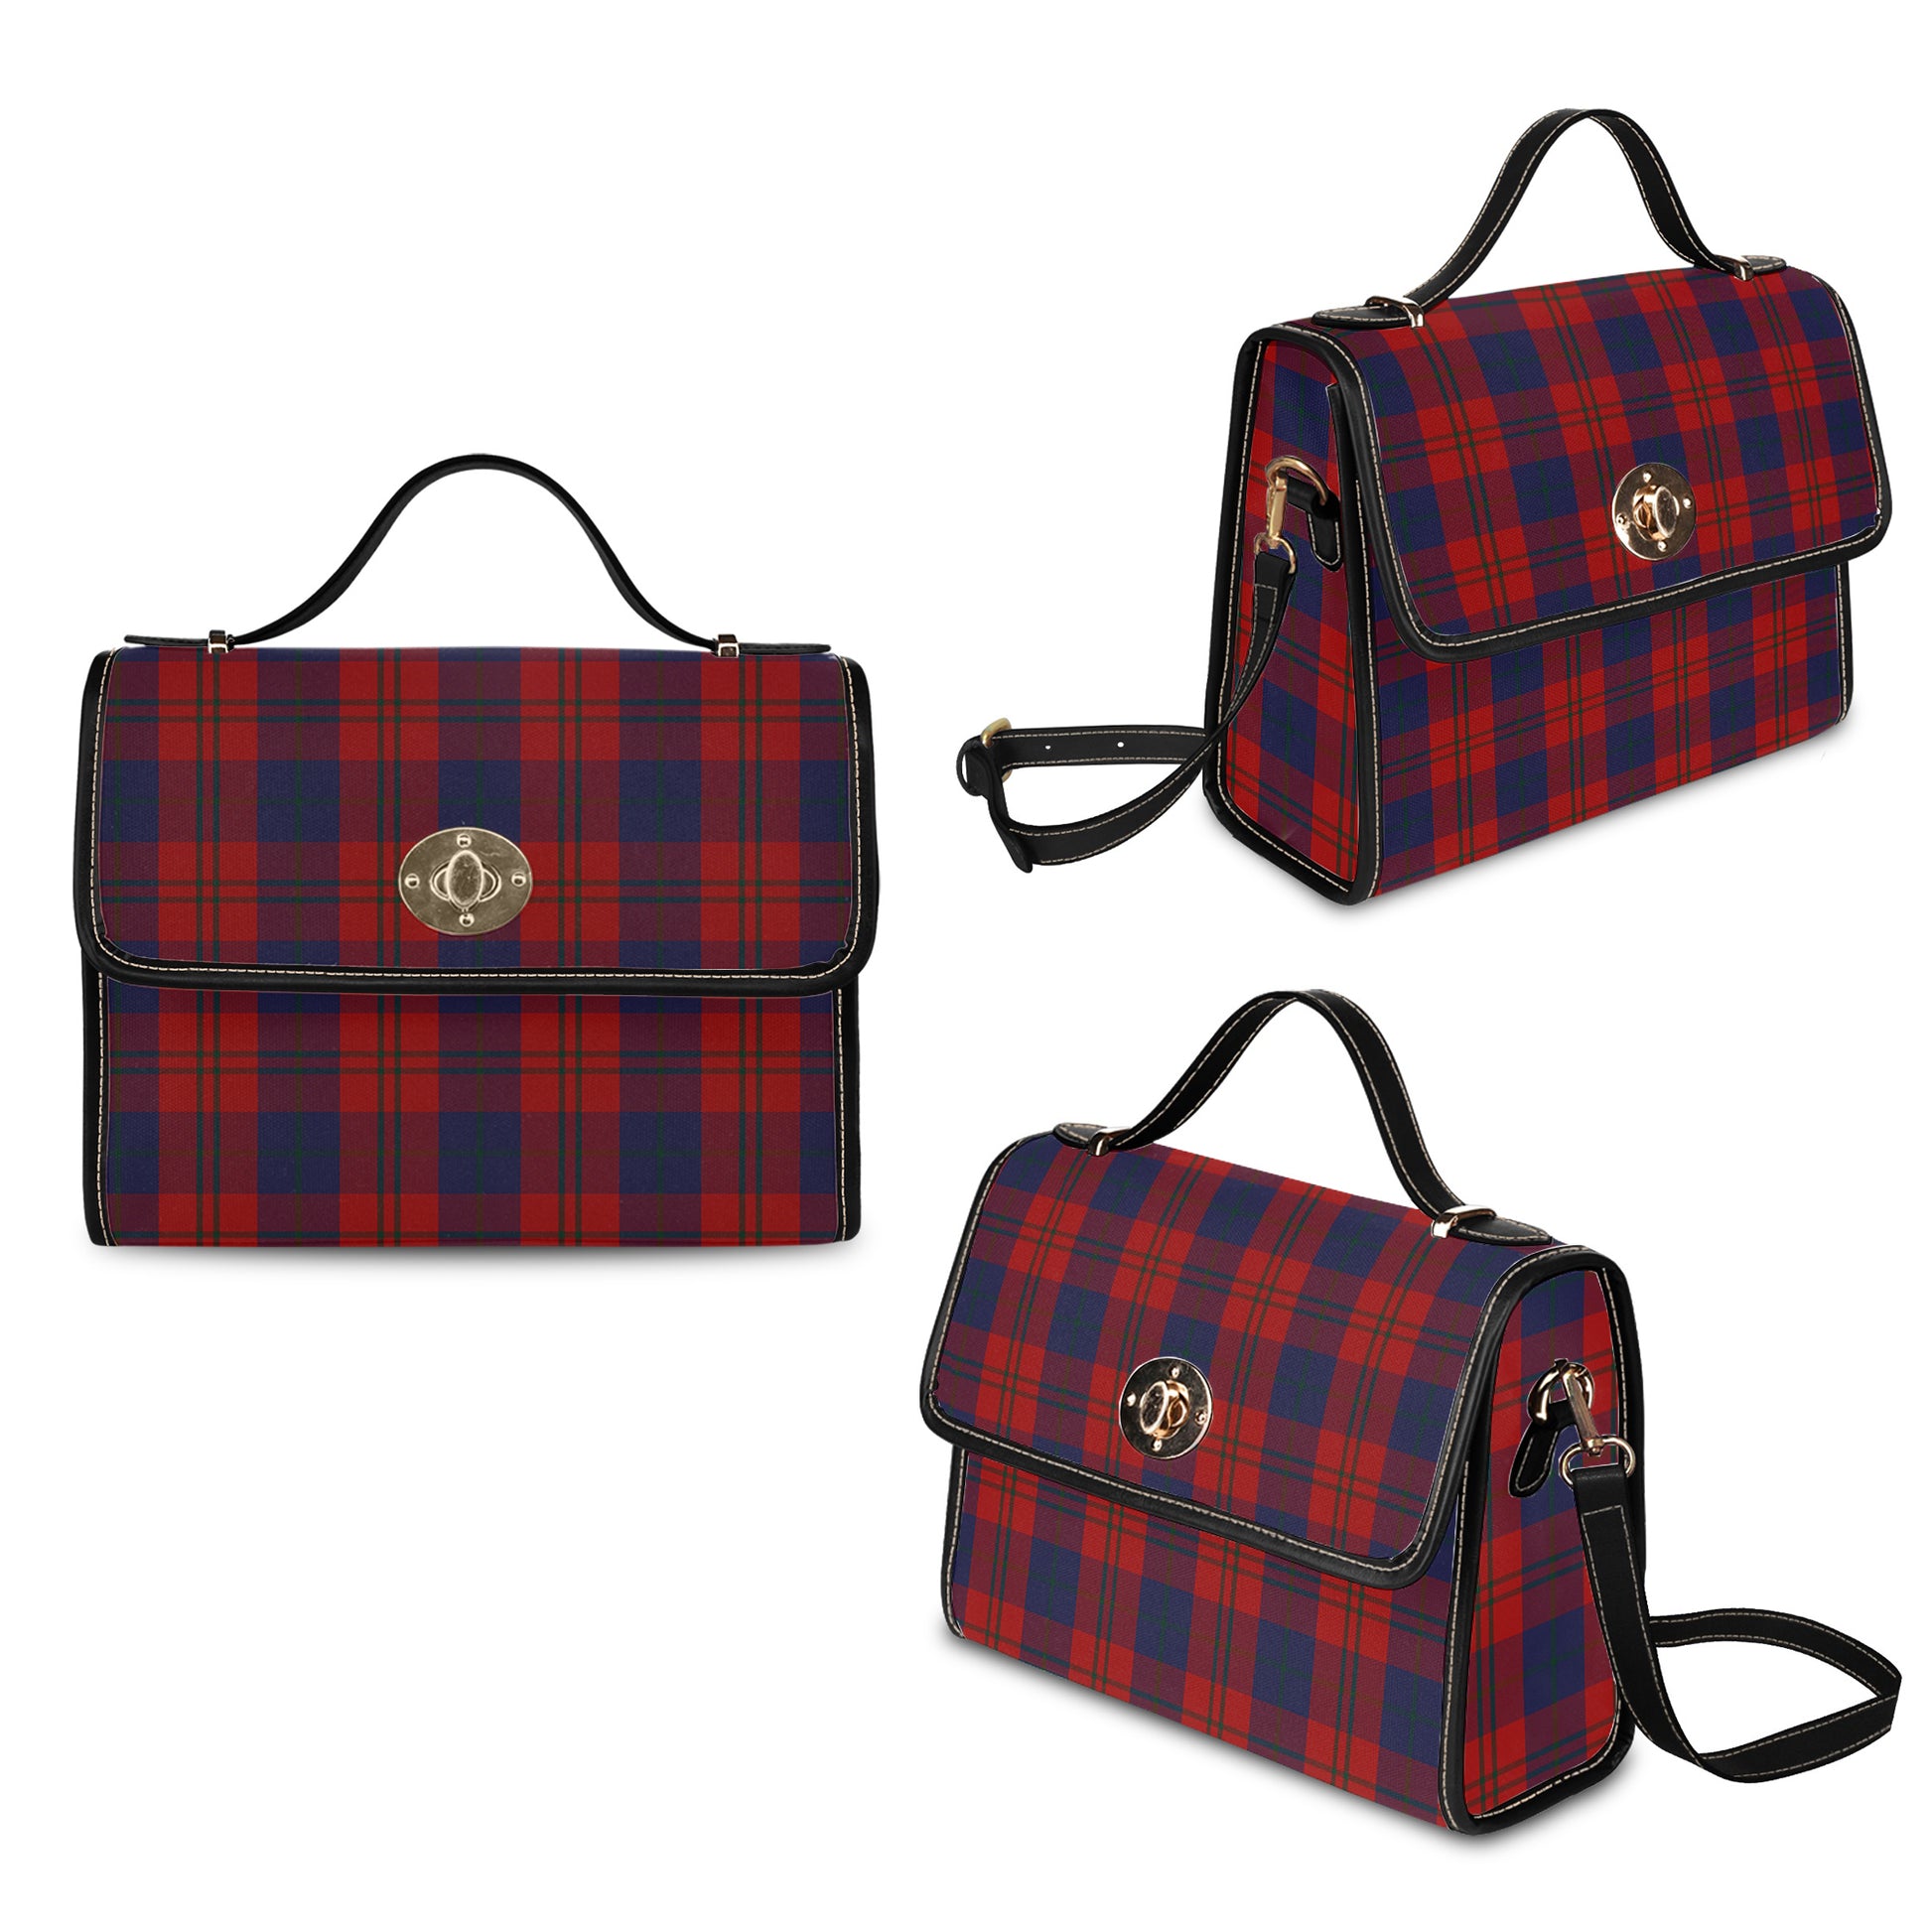 wotherspoon-tartan-leather-strap-waterproof-canvas-bag